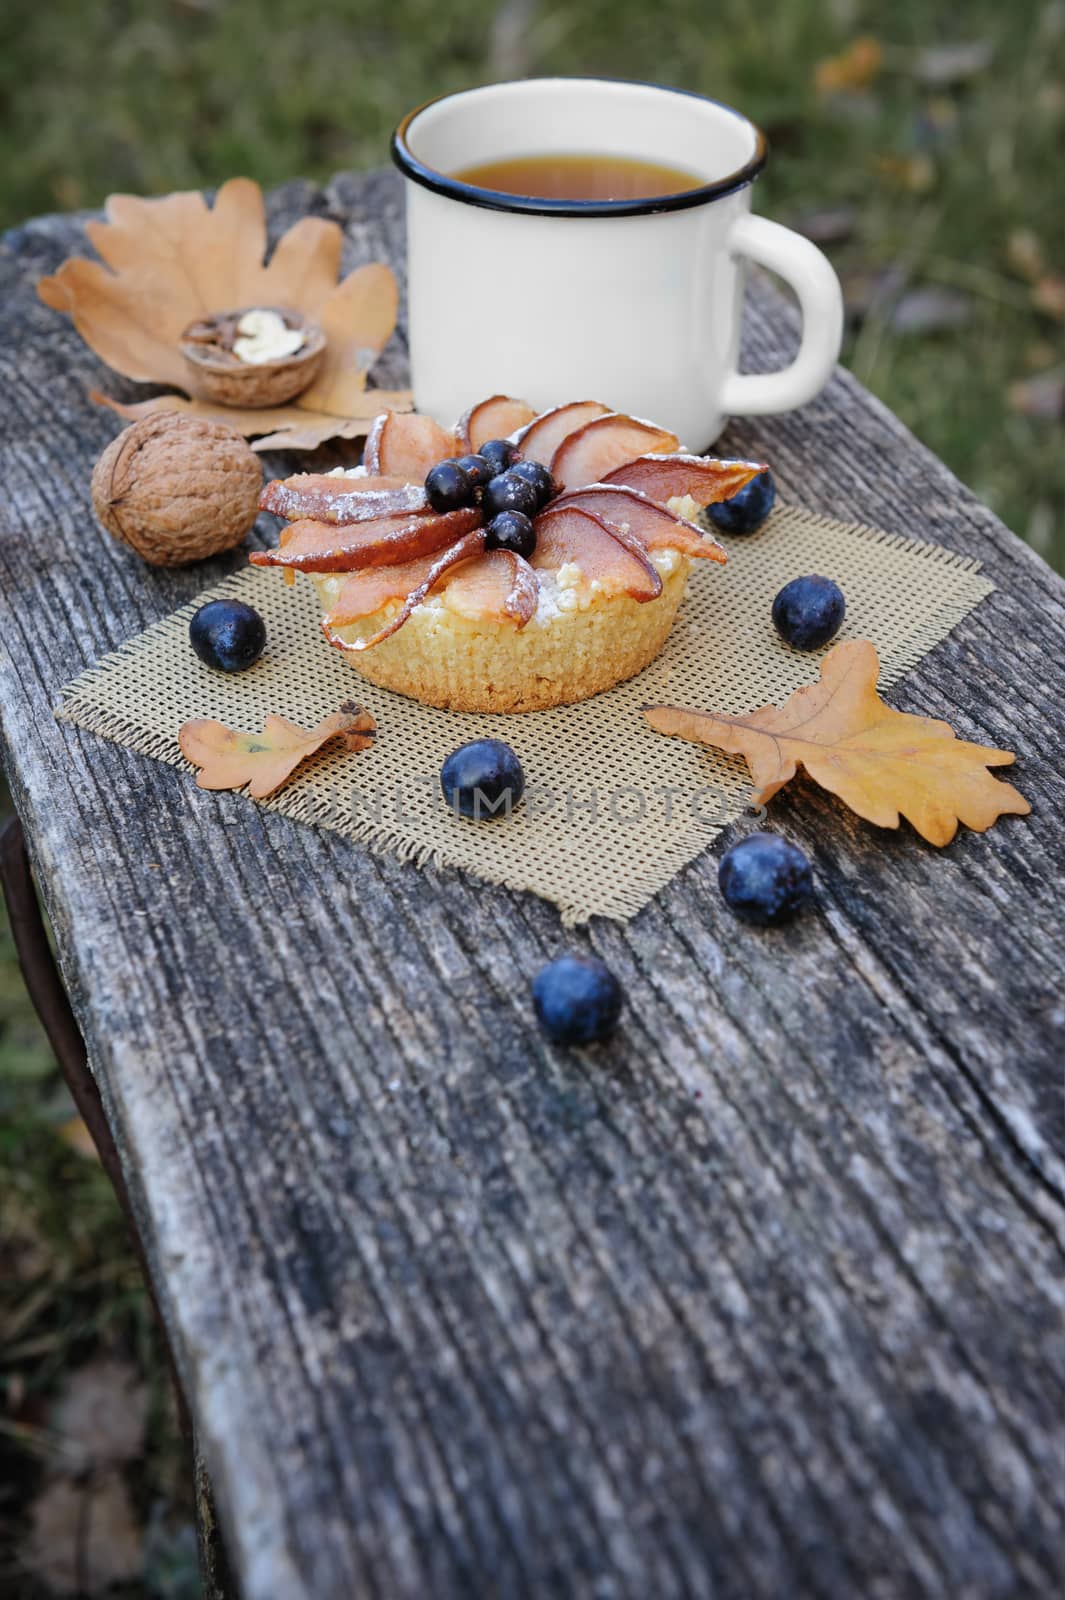 Romantic autumn still life with basket cake, cup of tea, walnuts, blackthorn berries and leaves, in cold colors